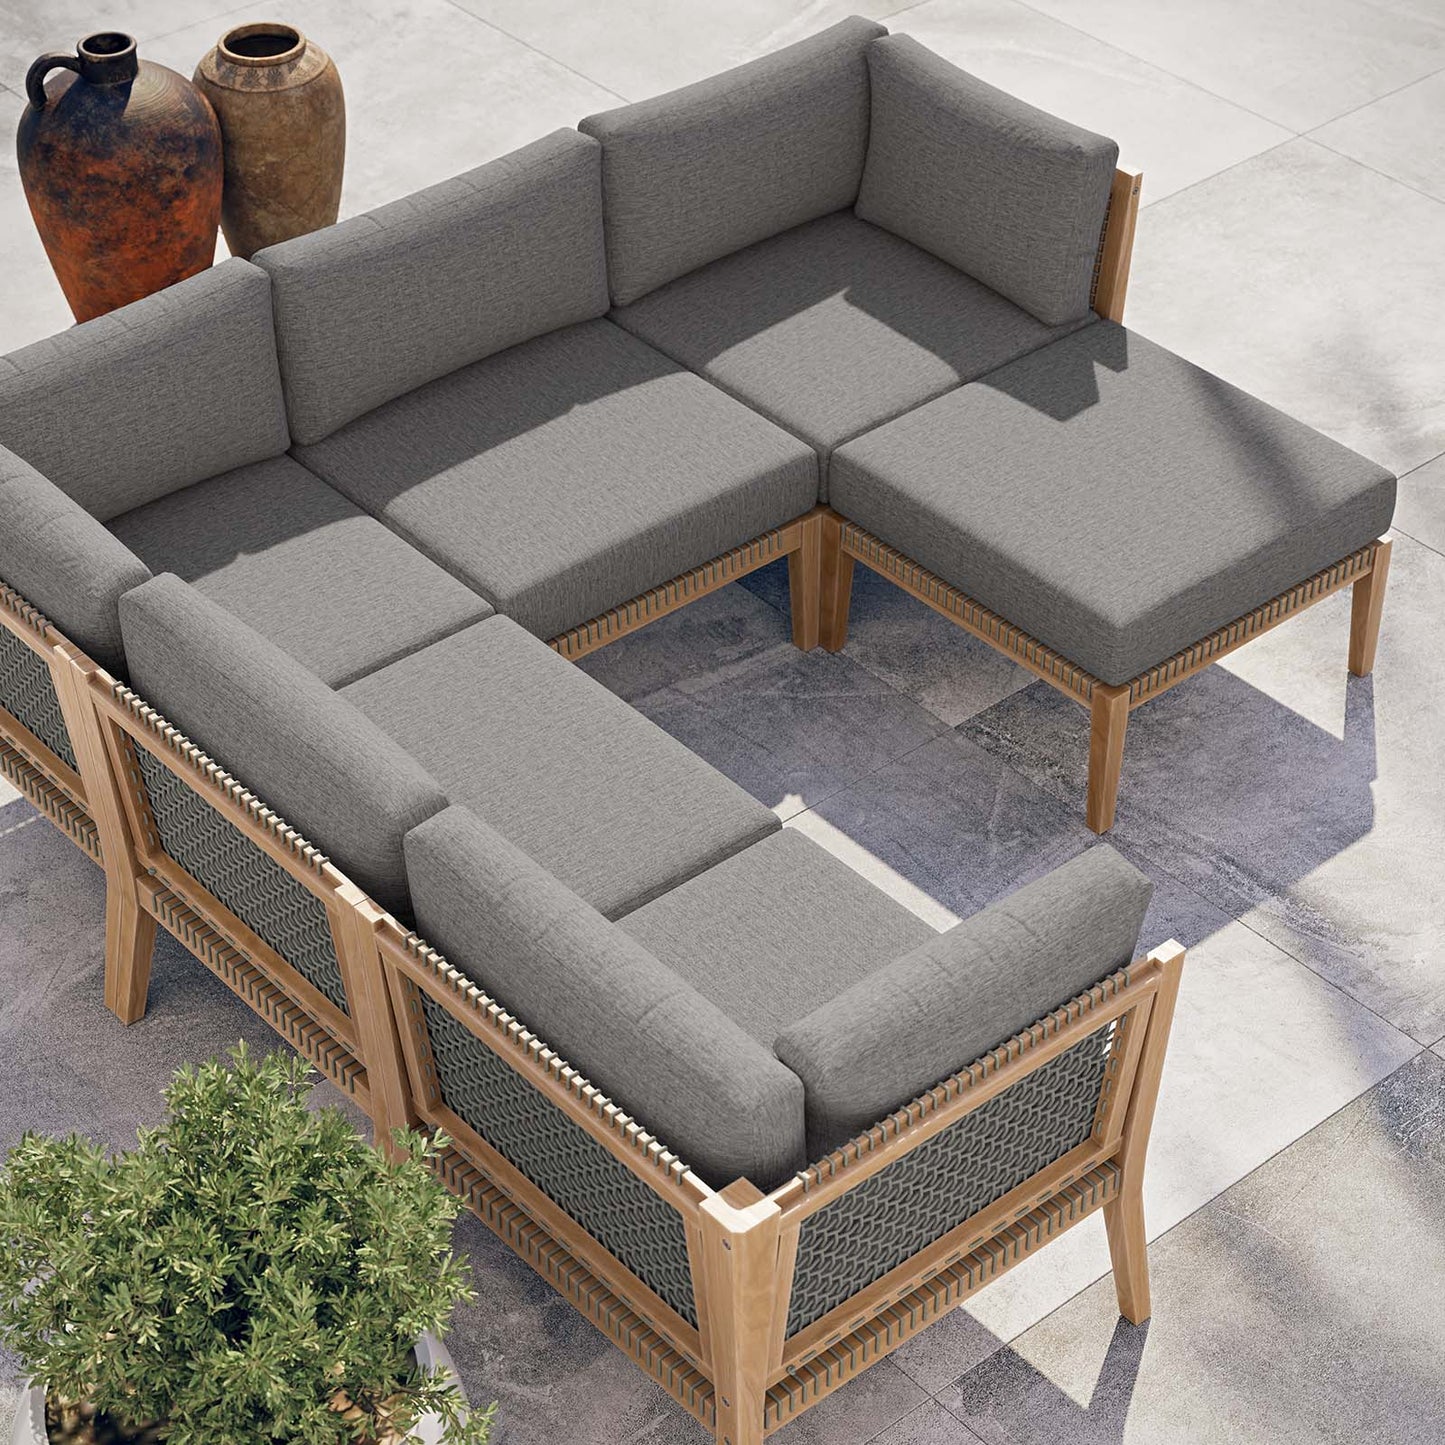 Clearwater Outdoor Patio Teak Wood 6-Piece Sectional Sofa Gray Graphite EEI-6124-GRY-GPH